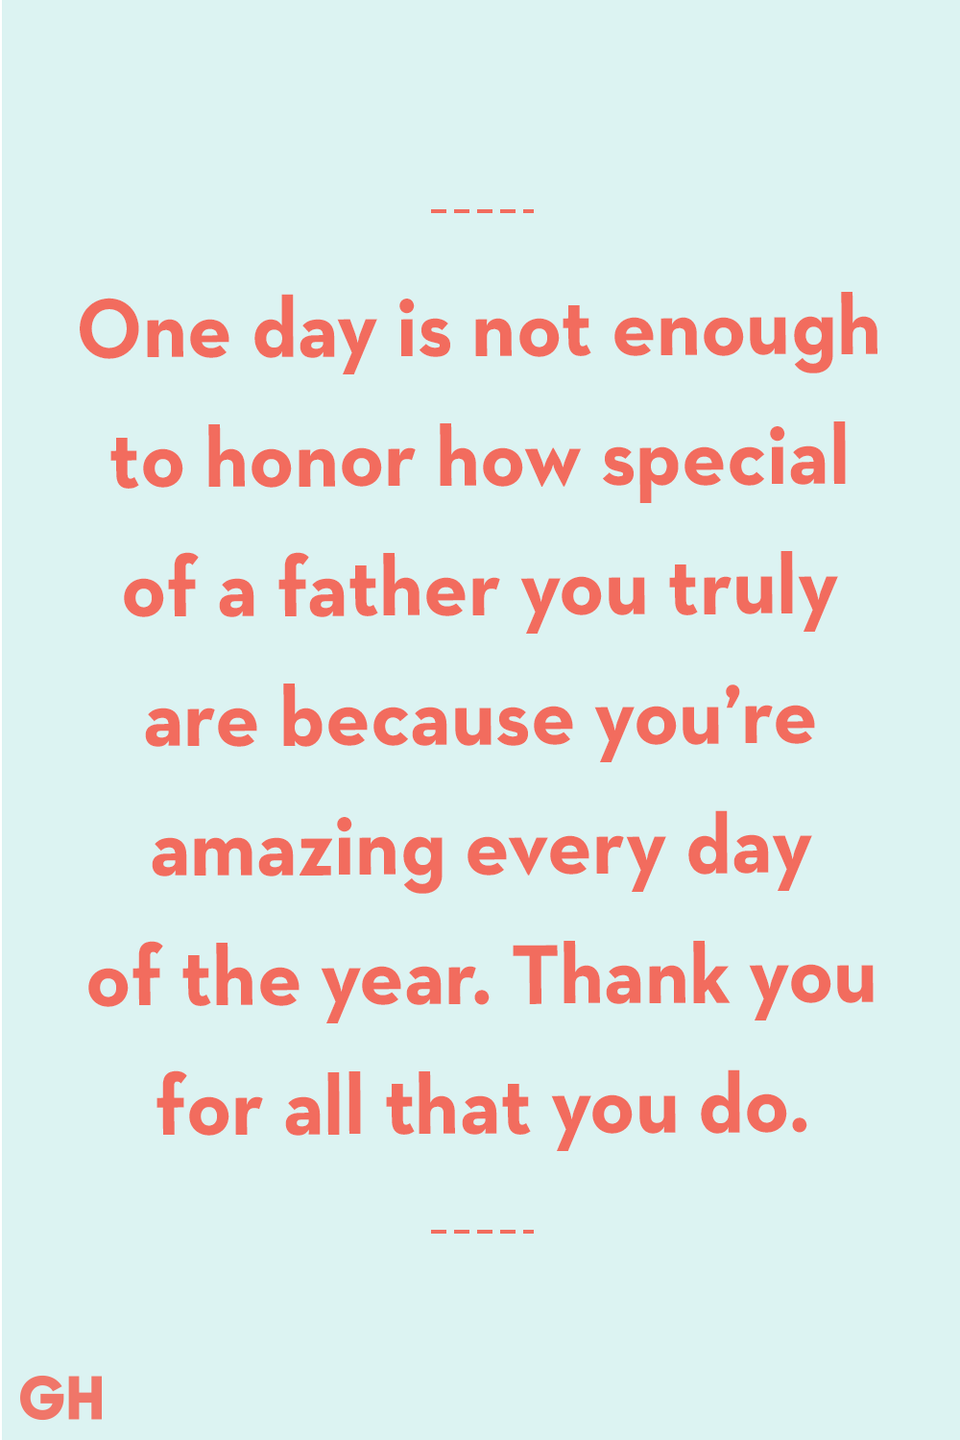 Send Your Husband the Sweetest Father's Day Message This Year Using These Quotes